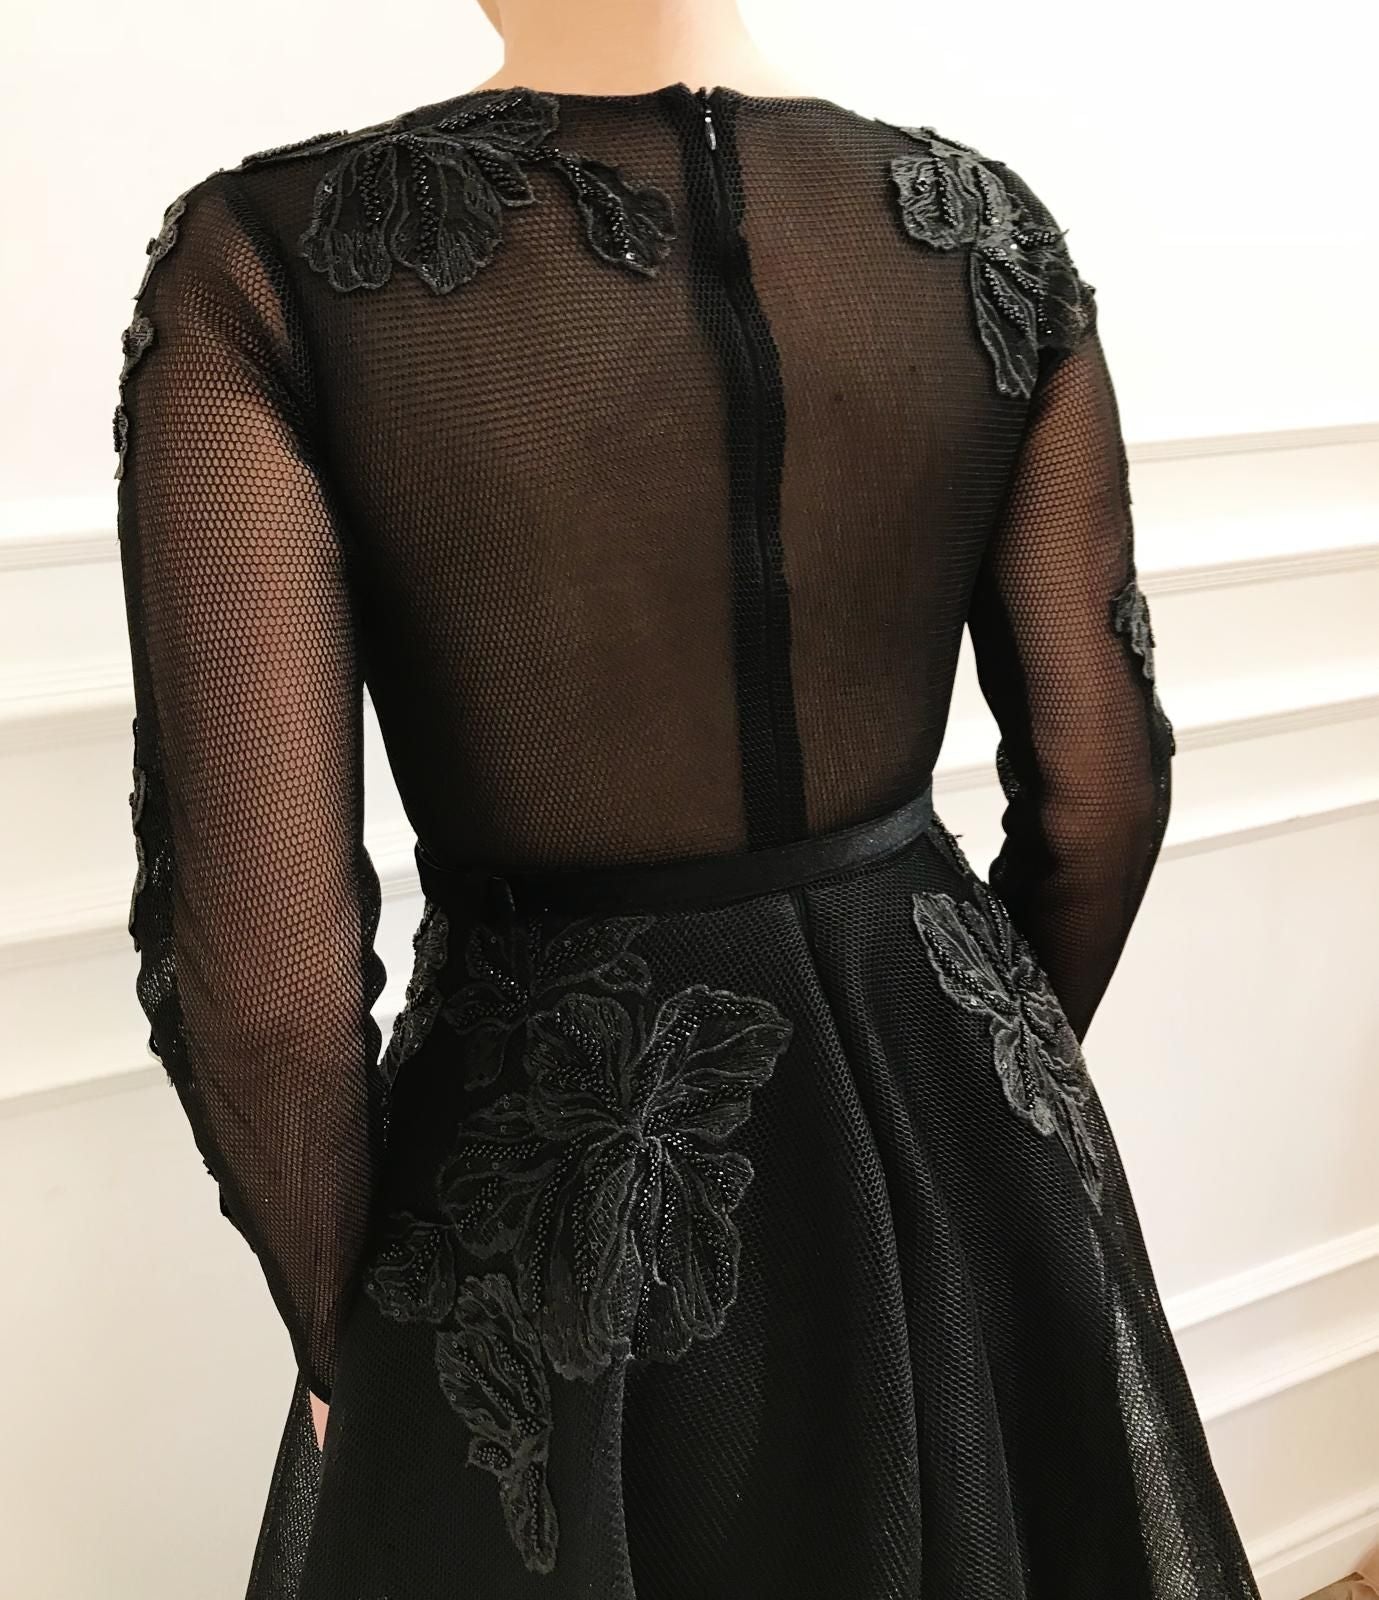 Black A-Line dress with belt, long sleeves and lace